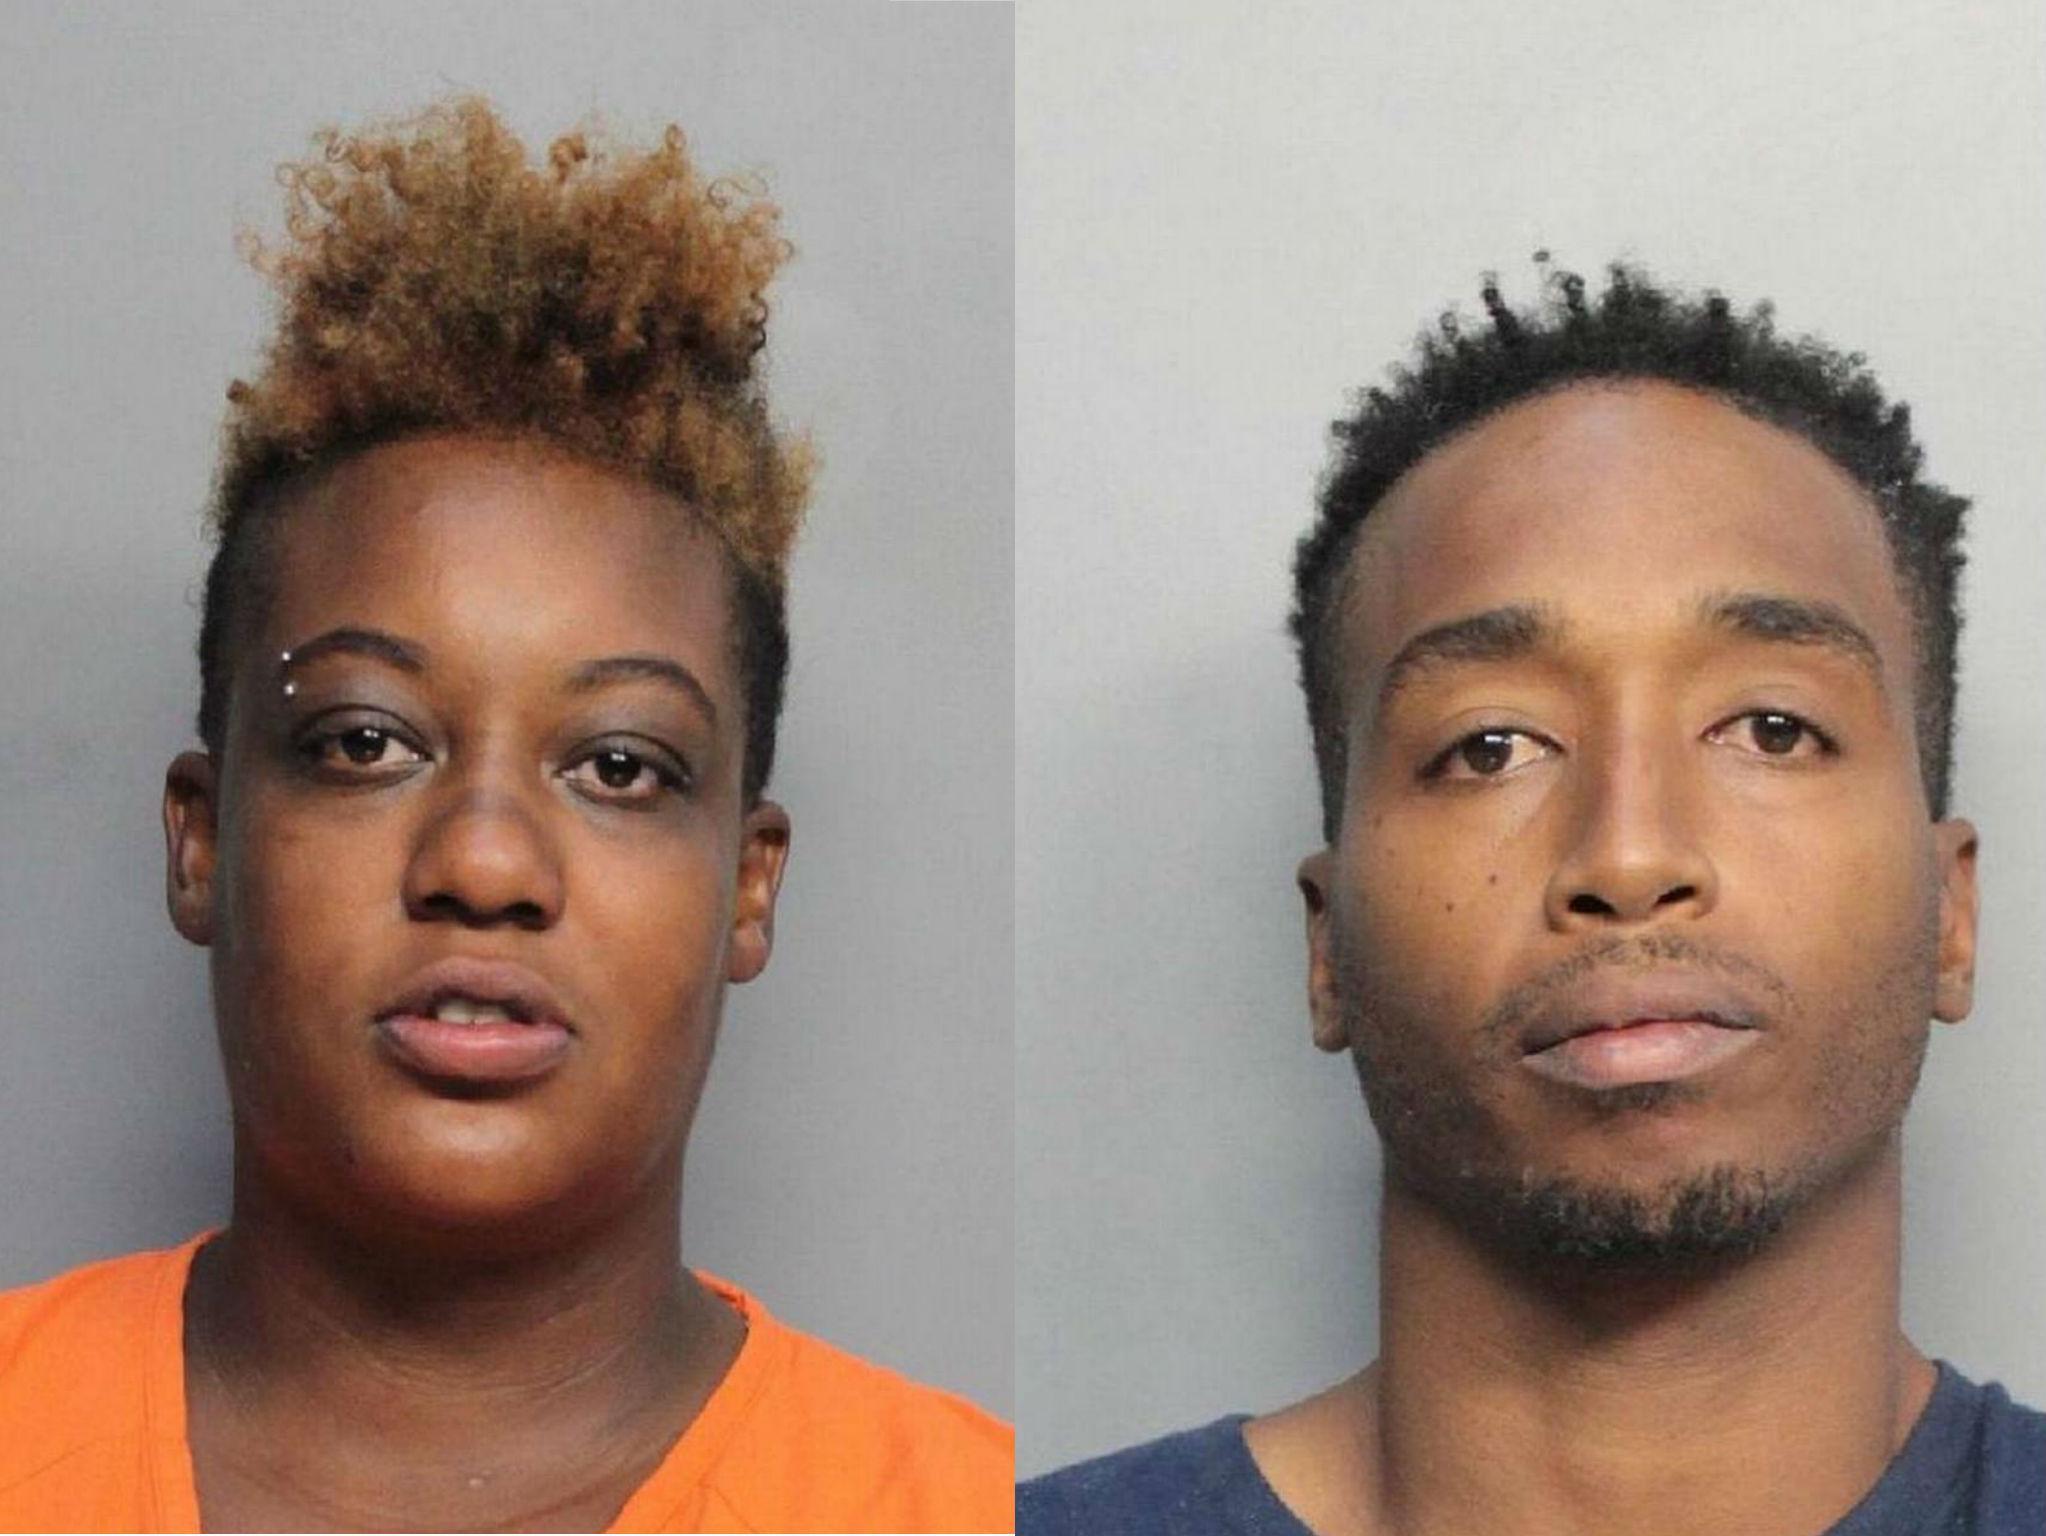 The couple were arrested the next day after allegedly stealing sodas while naked